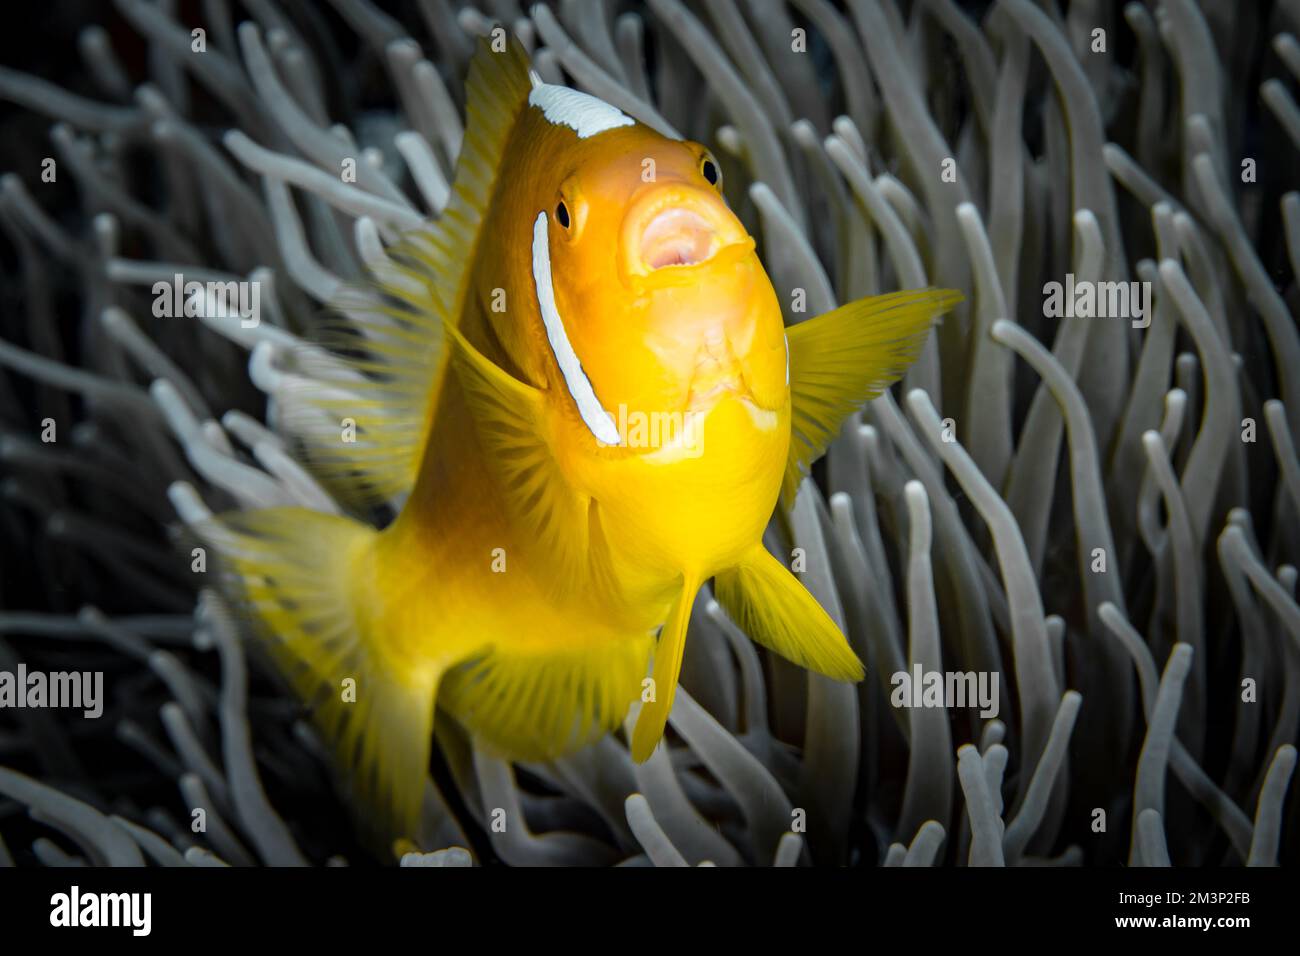 White bonnet clownfish in Papua - Rare hybrid species anemonefish found in the south pacific Stock Photo